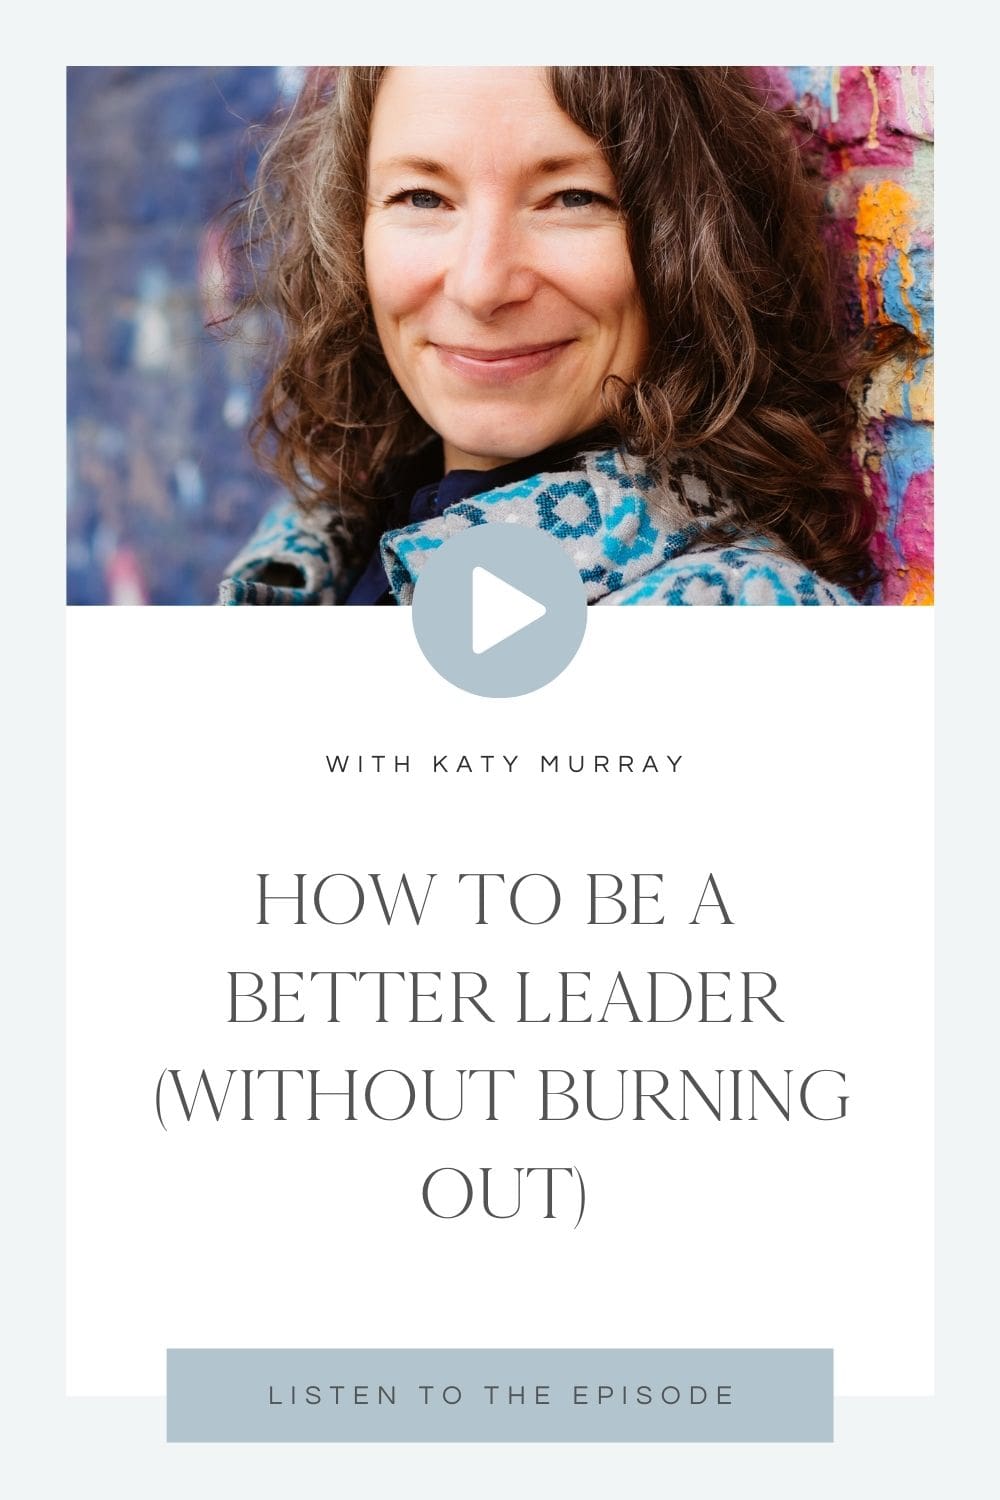 How to be a better leader Katy Murray interview